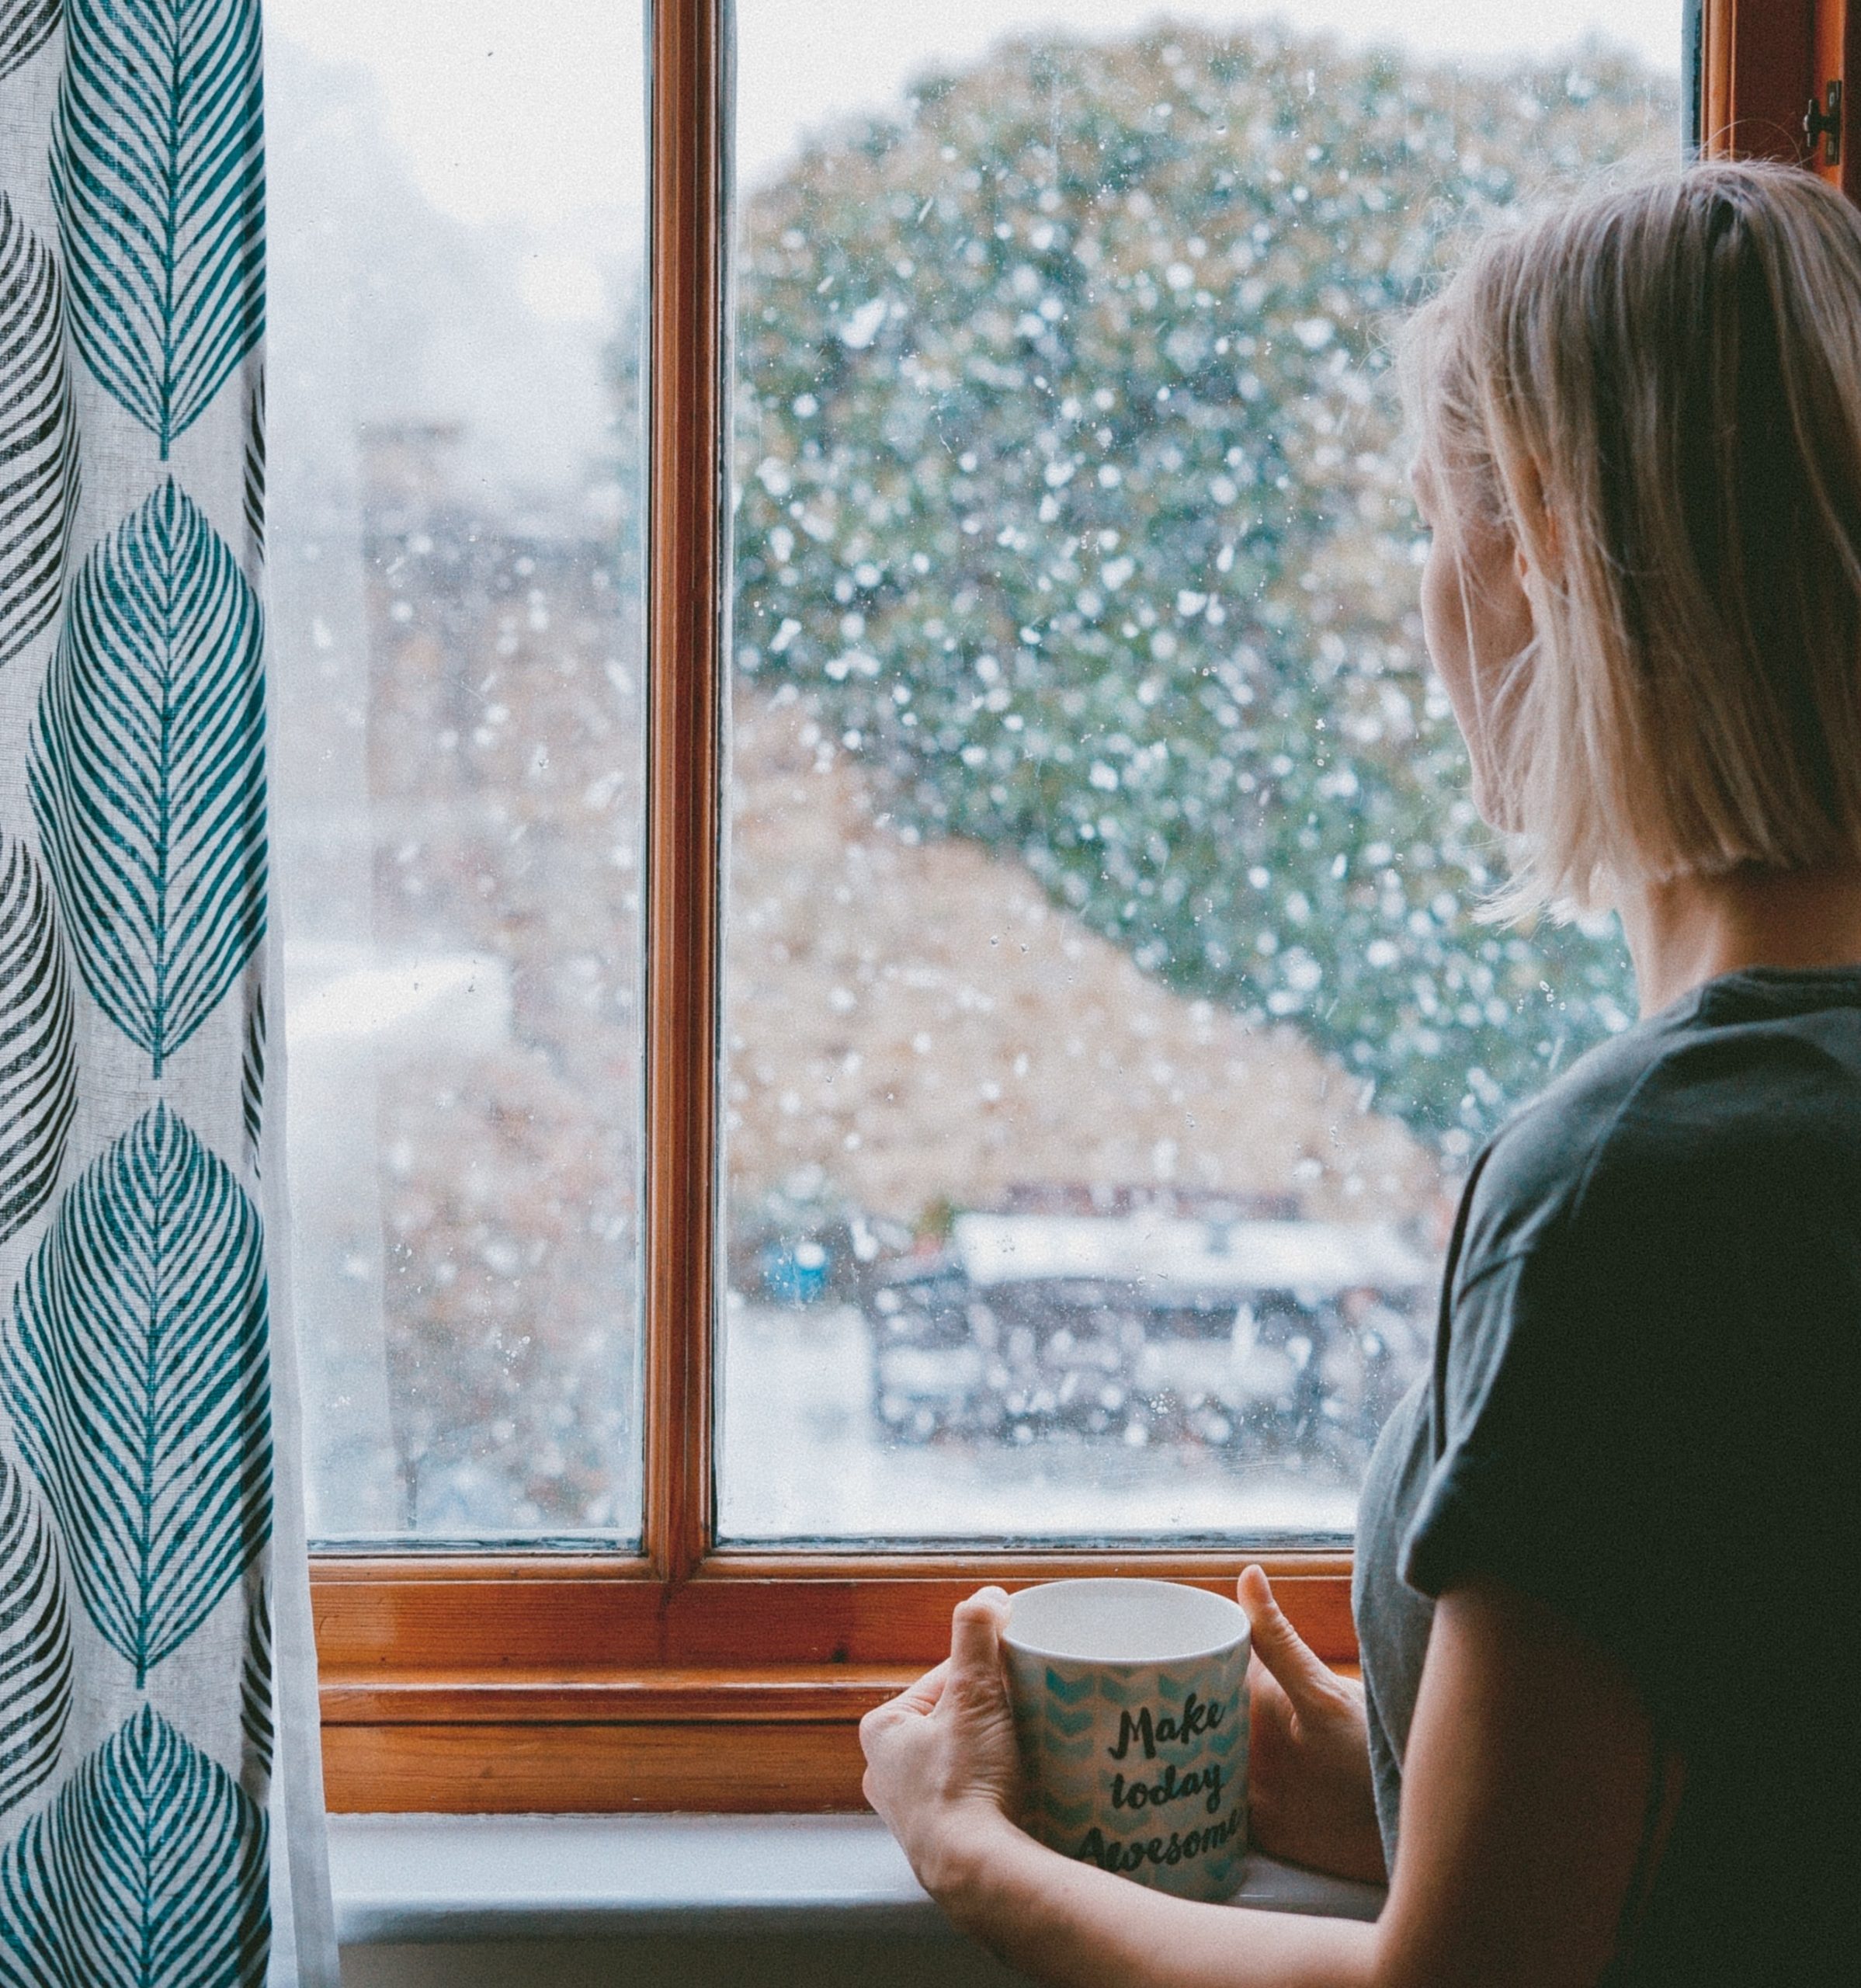 Woman holding a mug watches from a window as snow falls outside.